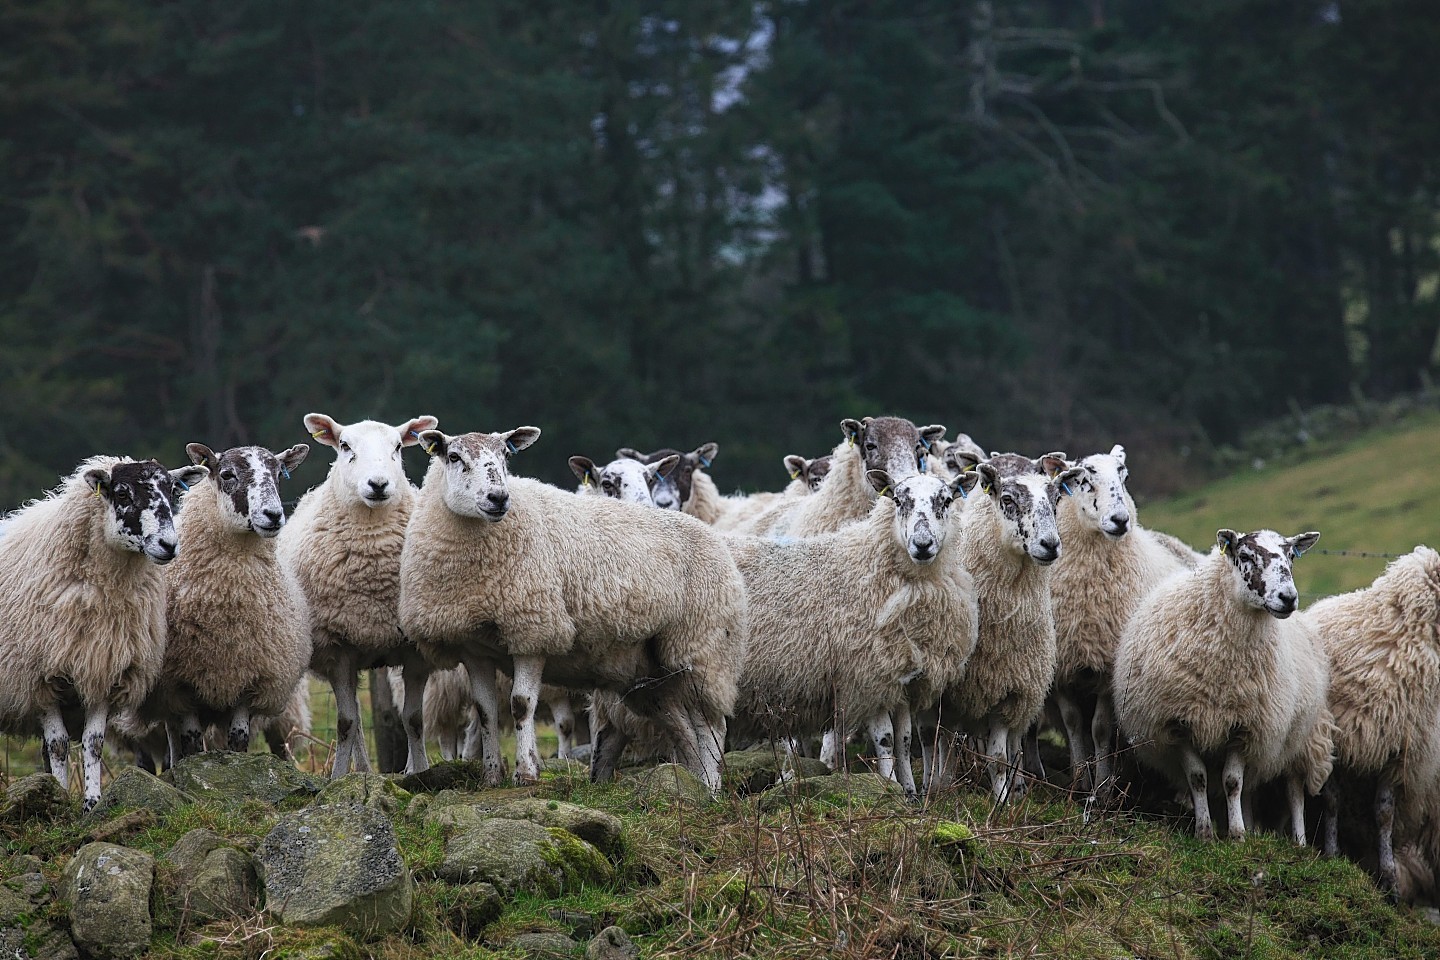 NFU Scotland has called on politicians to safeguard hill farmers and crofters.